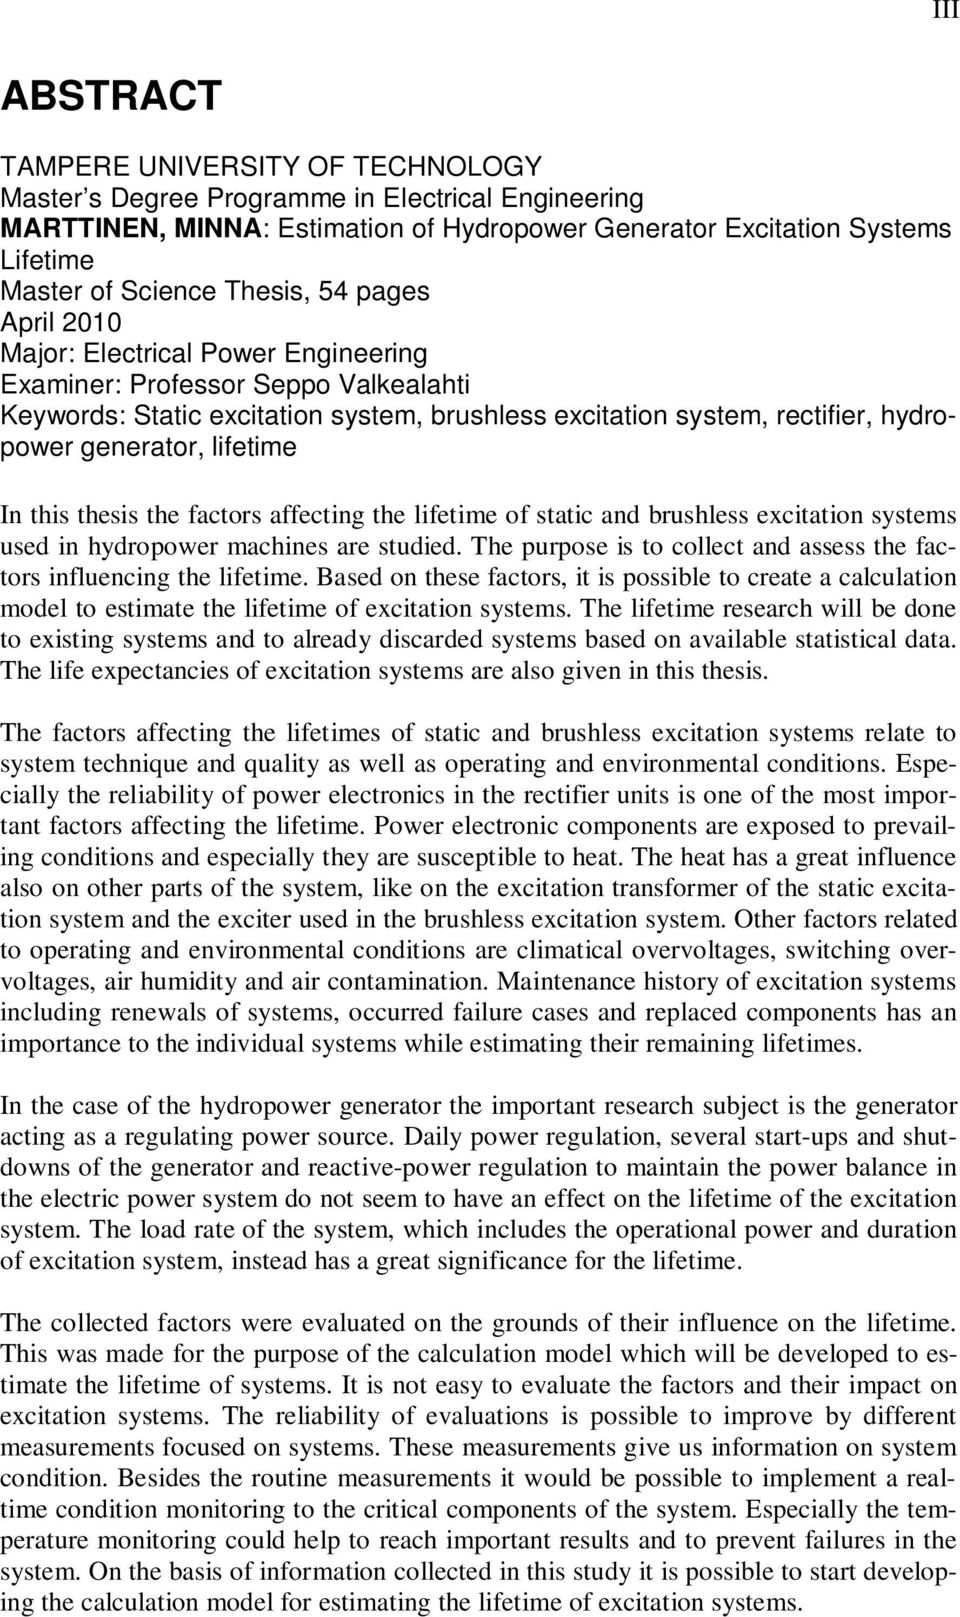 lifetime In this thesis the factors affecting the lifetime of static and brushless excitation systems used in hydropower machines are studied.